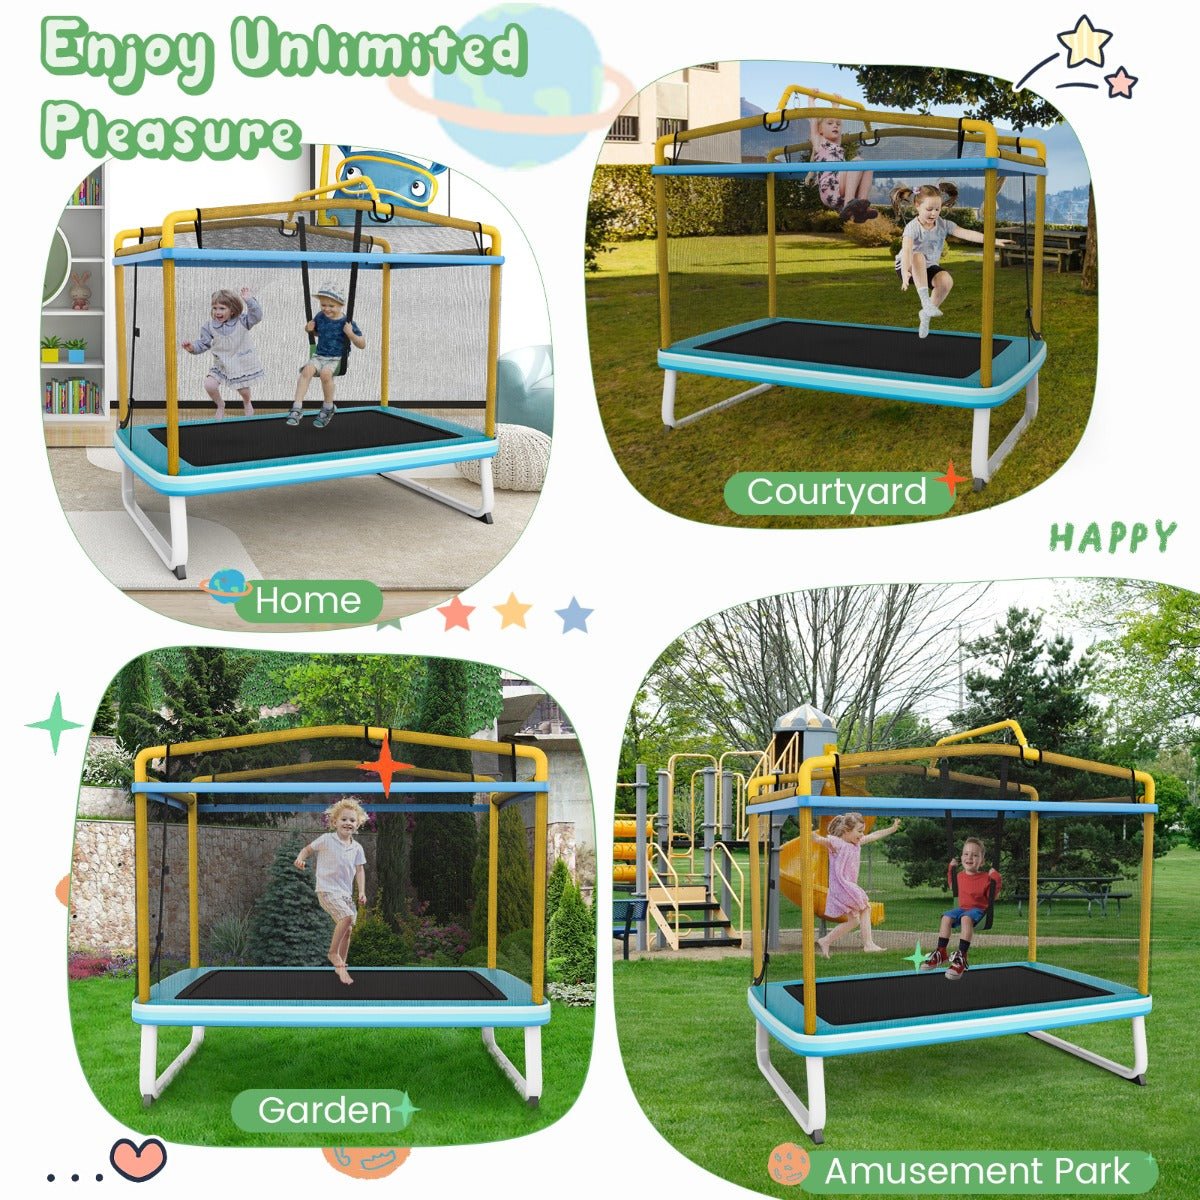 Active Joy: 3-in-1 Rectangle Trampoline with Swing & Horizontal Bar Yellow